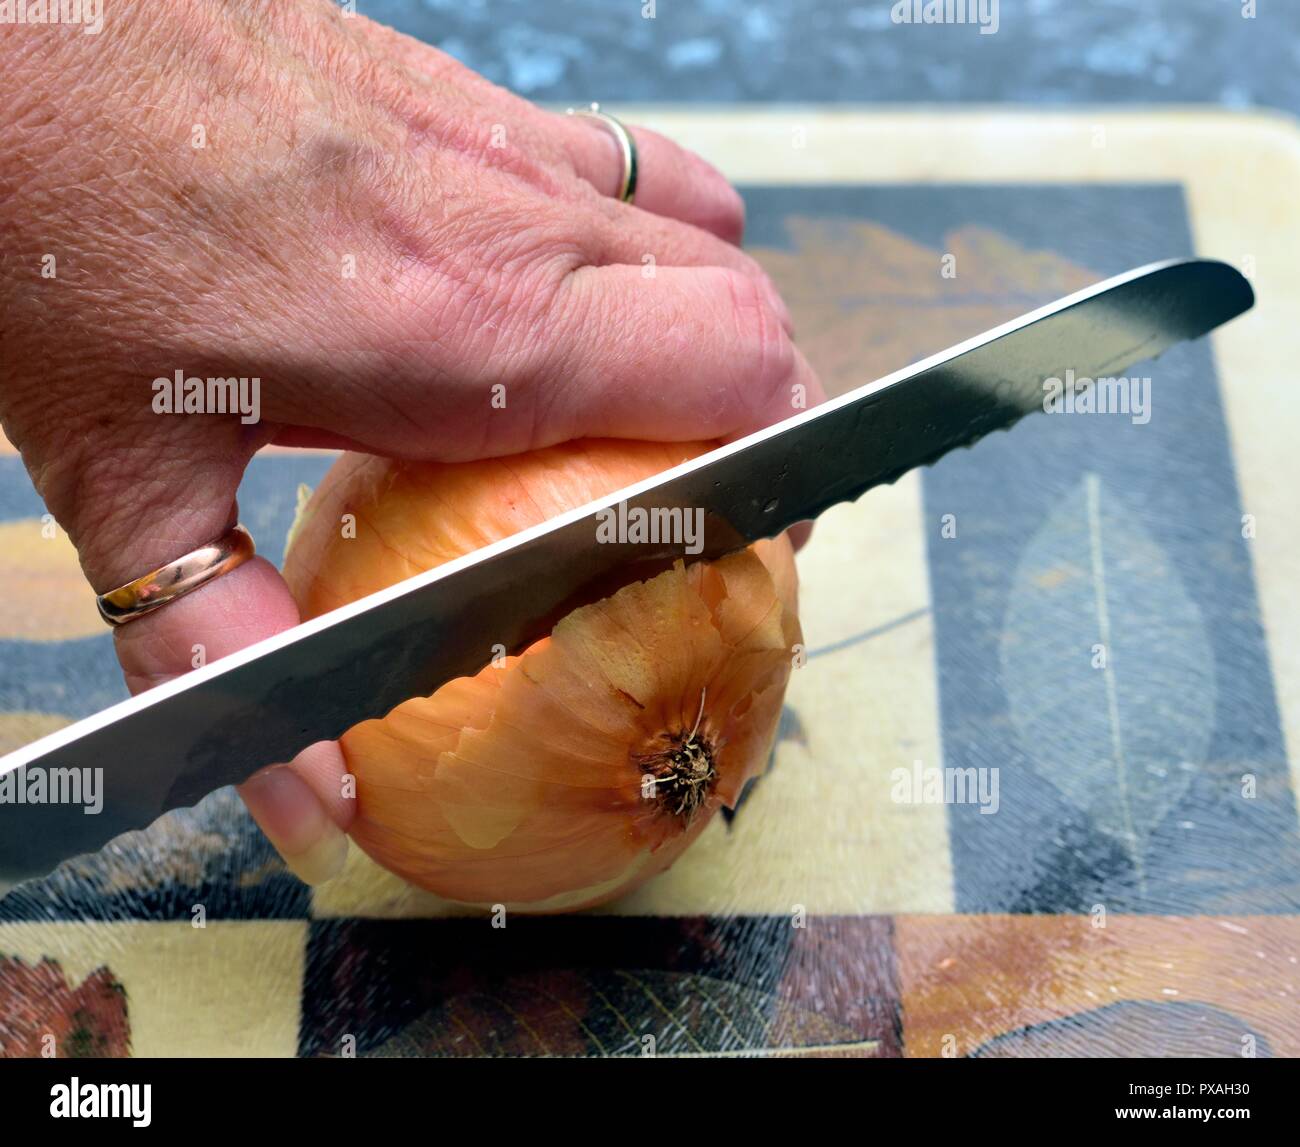 Cutting up a cooking onion on a chopping board Stock Photo